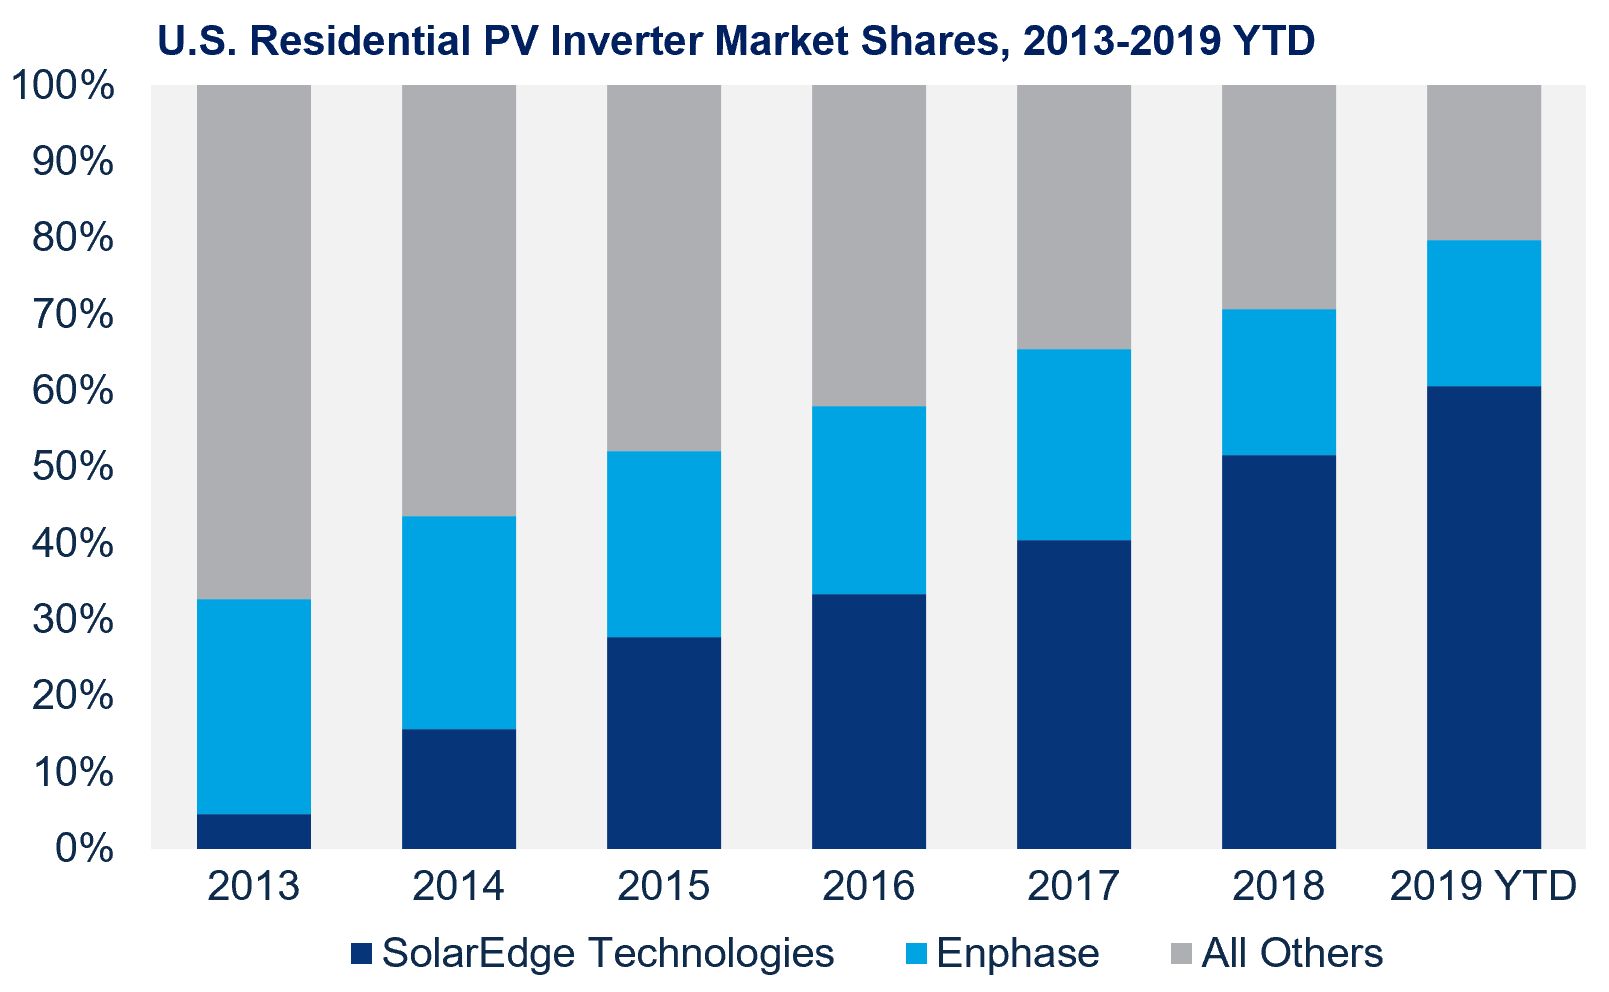 Chart showing annual US residential solar market shares for solaredge, enphase, and other.